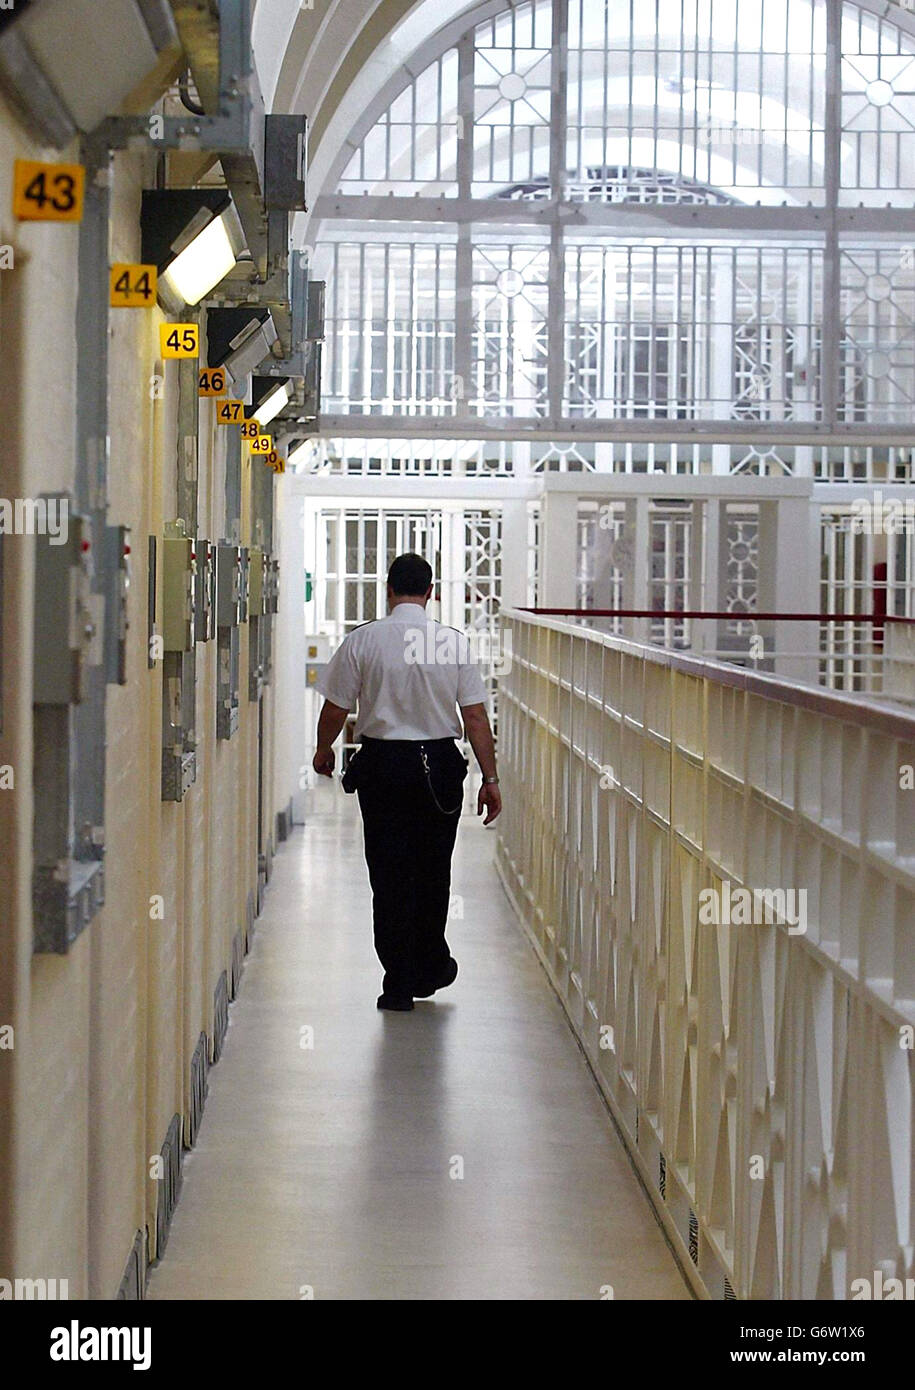 The B-wing at Wakefield Prison, West Yorkshire. Prison staff at Wakefield, which holds 570 inmates, 70% of whom are serving life and 20% serving 10 years or more, were criticised for their 'disrespectful' attitude to offenders in their care. Chief Inspector of Prisons Anne Owers found there was an 'extremely high' number of complaints from inmates about bullying, although they added that procedures to deal with the complaints were thorough. Stock Photo